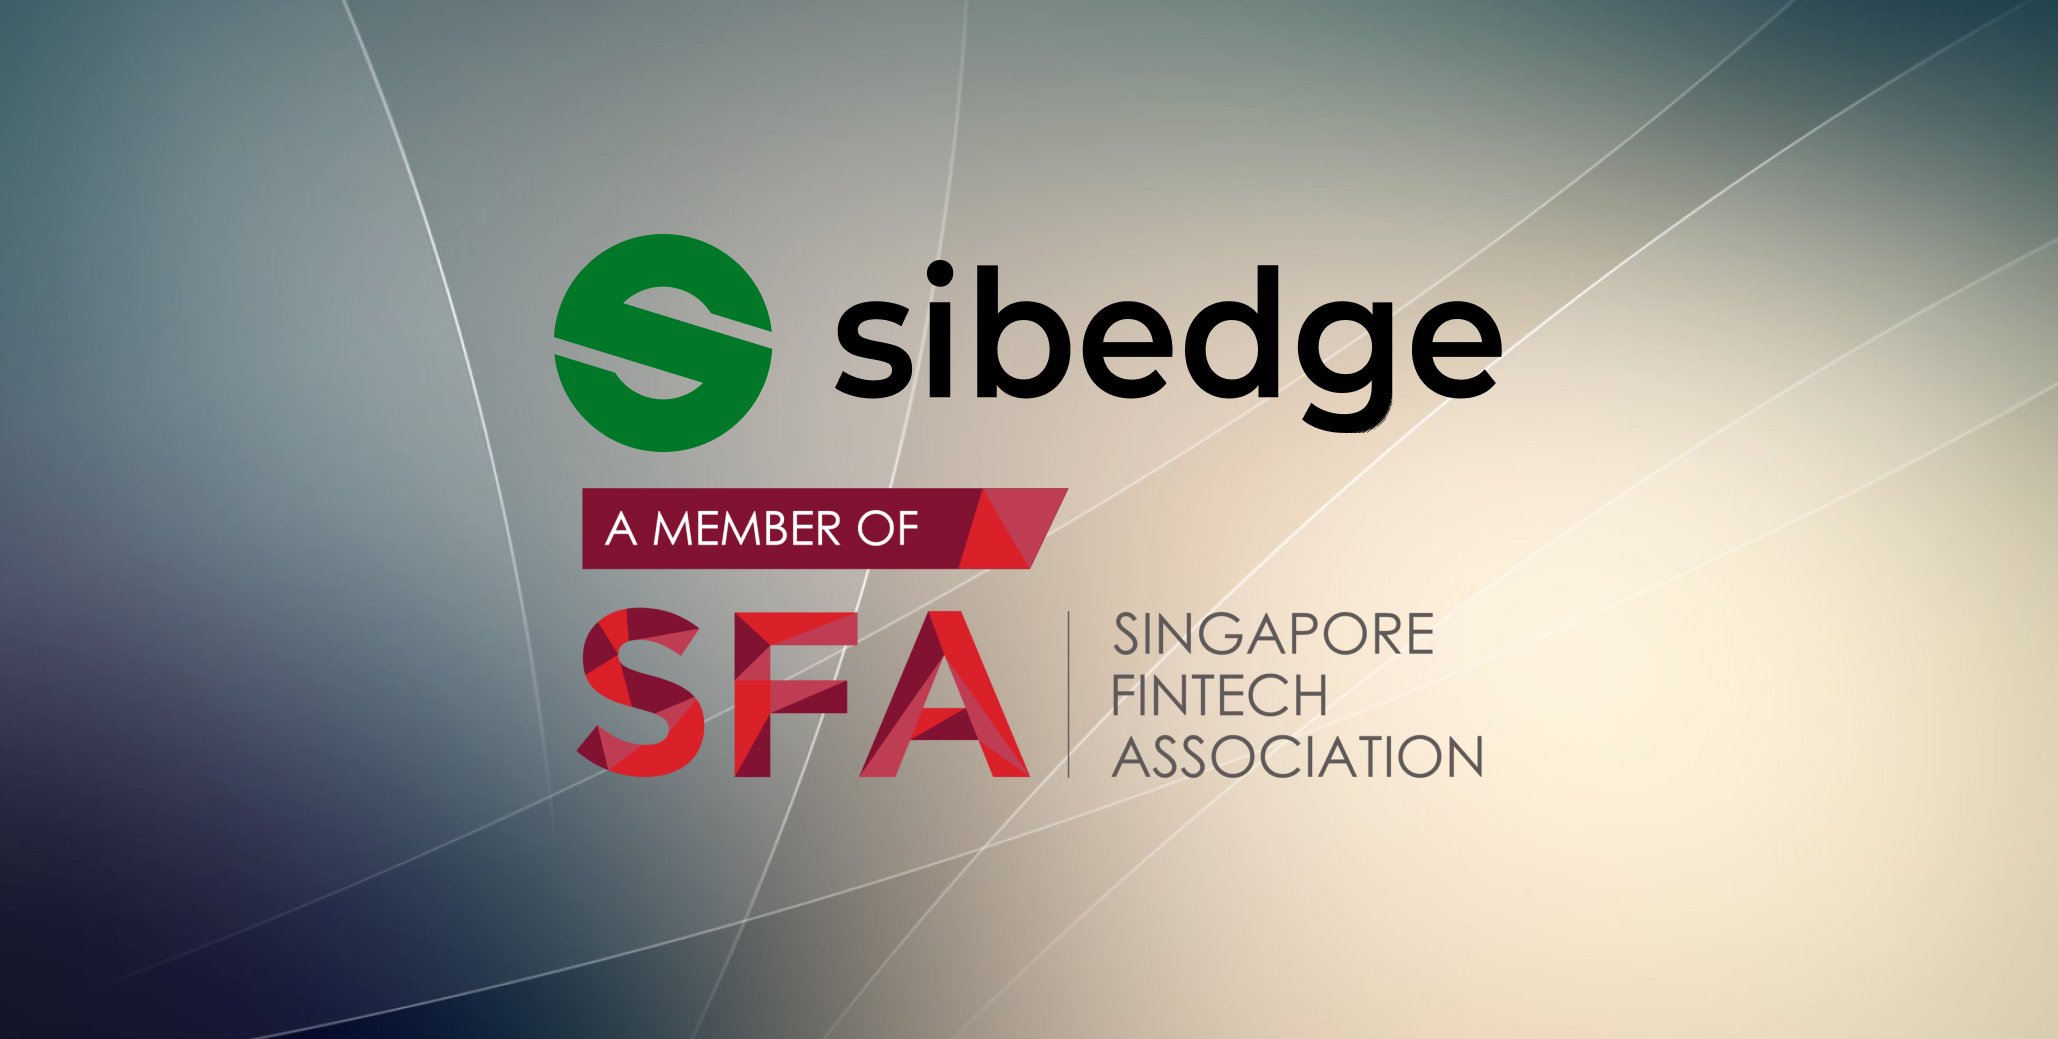 Sibedge has become a corporate member of the Singapore FinTech Association